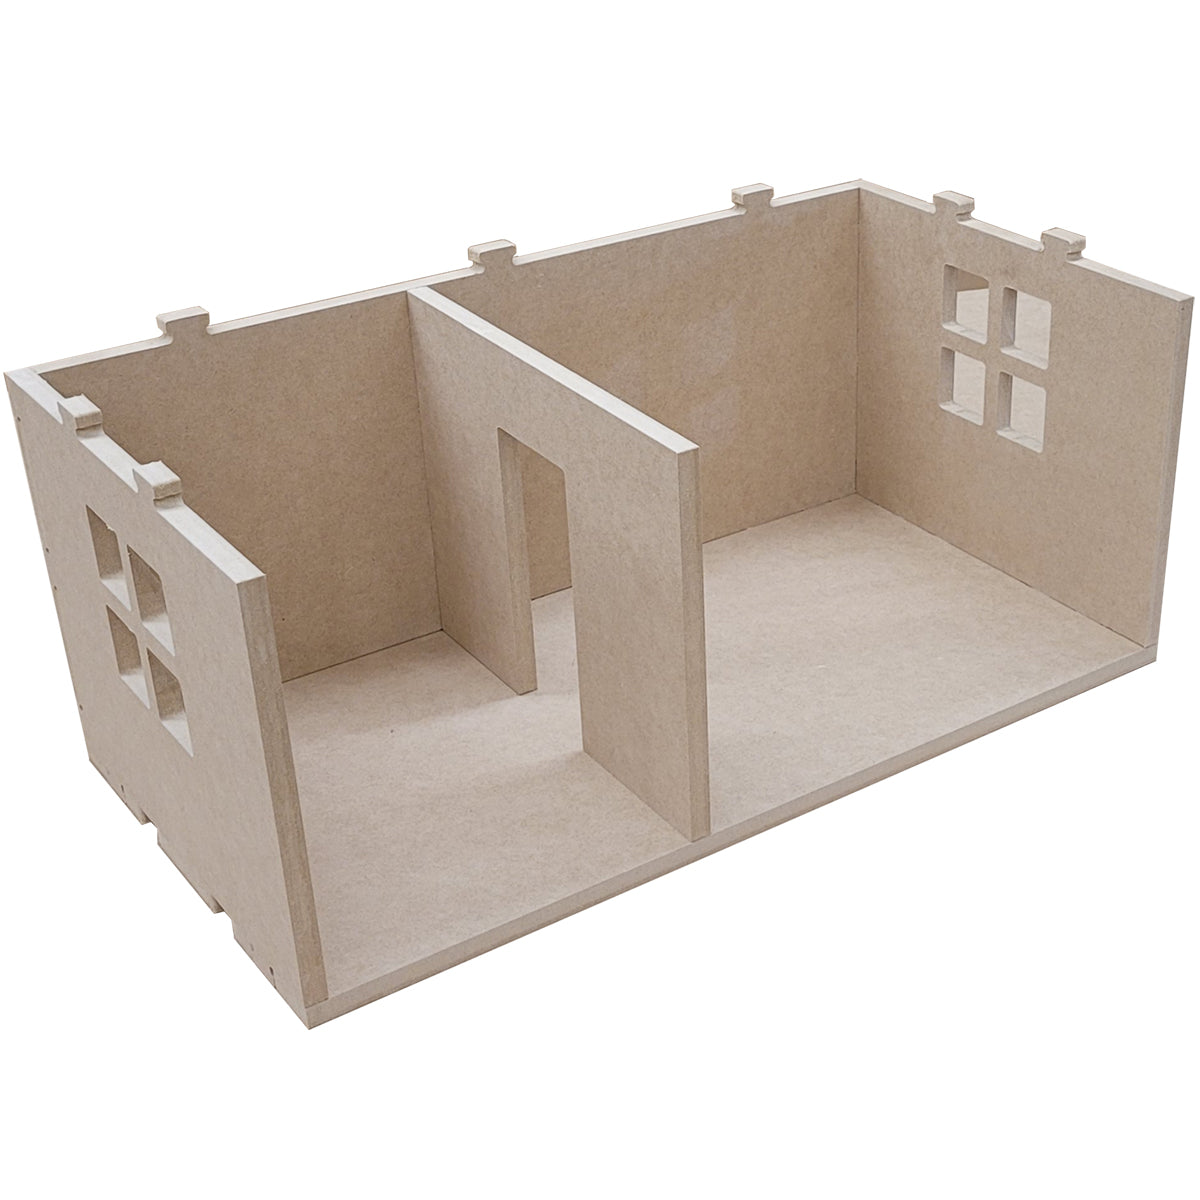 MIDDLE FLOOR for "Morning Glory" One Inch Scale (1:12) Modular, Customizable, and Stackable Dollhouse Kit